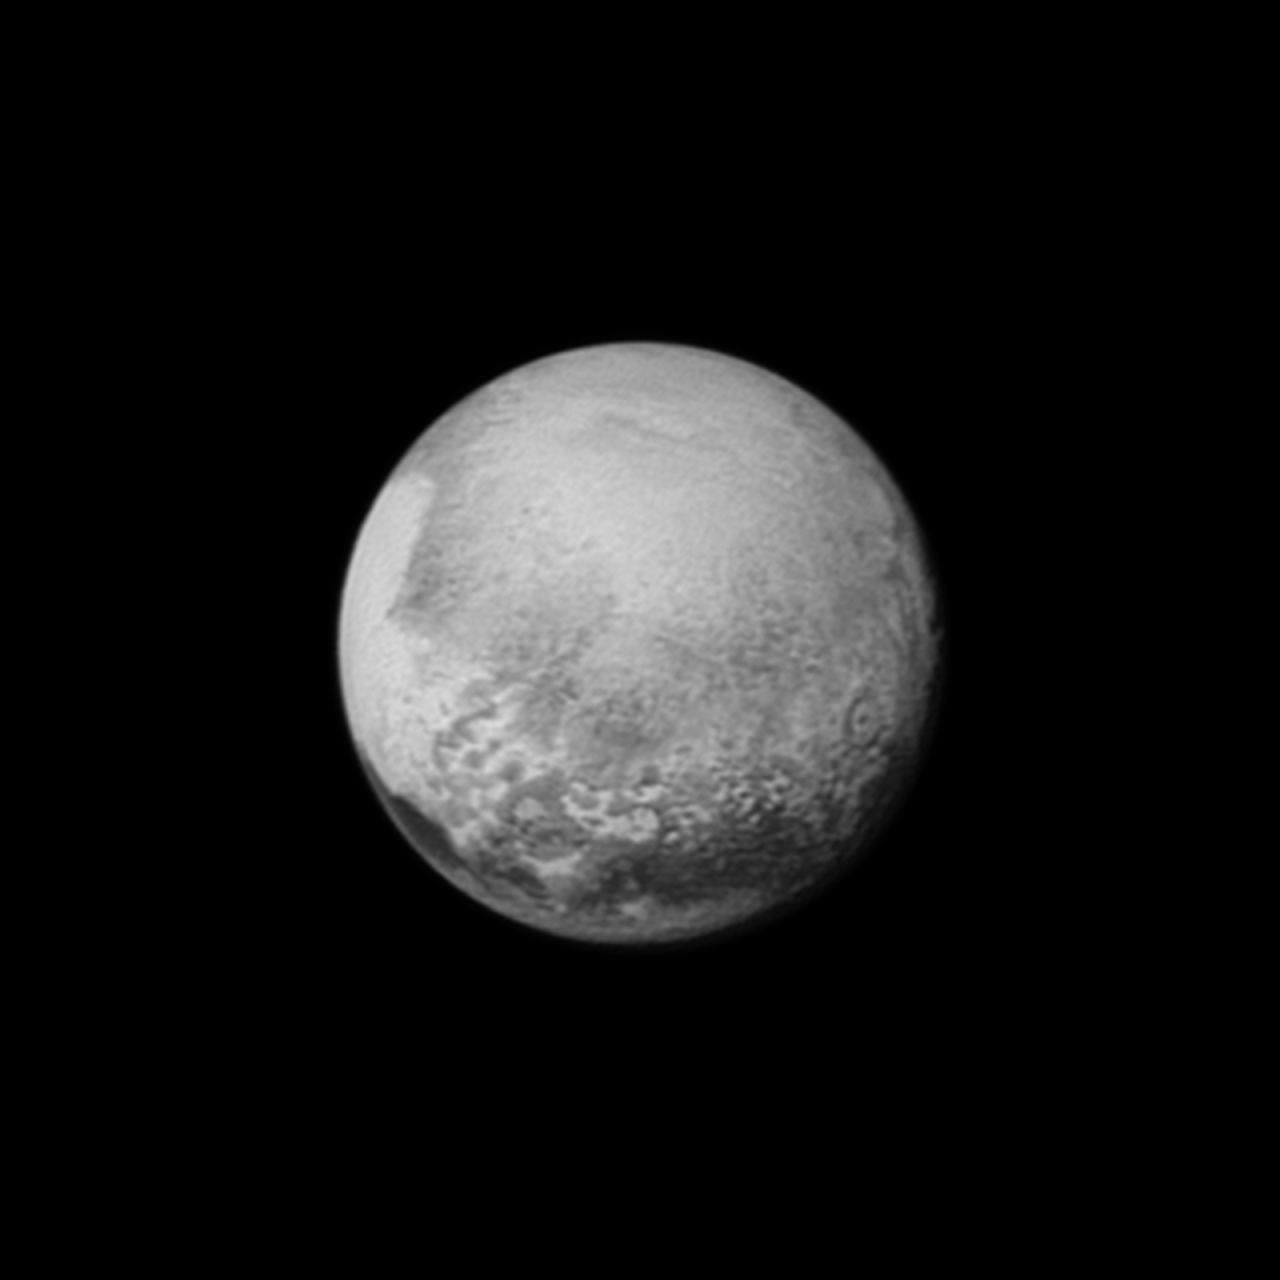 This image of Pluto was captured by New Horizons on July 12. The spacecraft was 1.6 million miles from Pluto at the time.